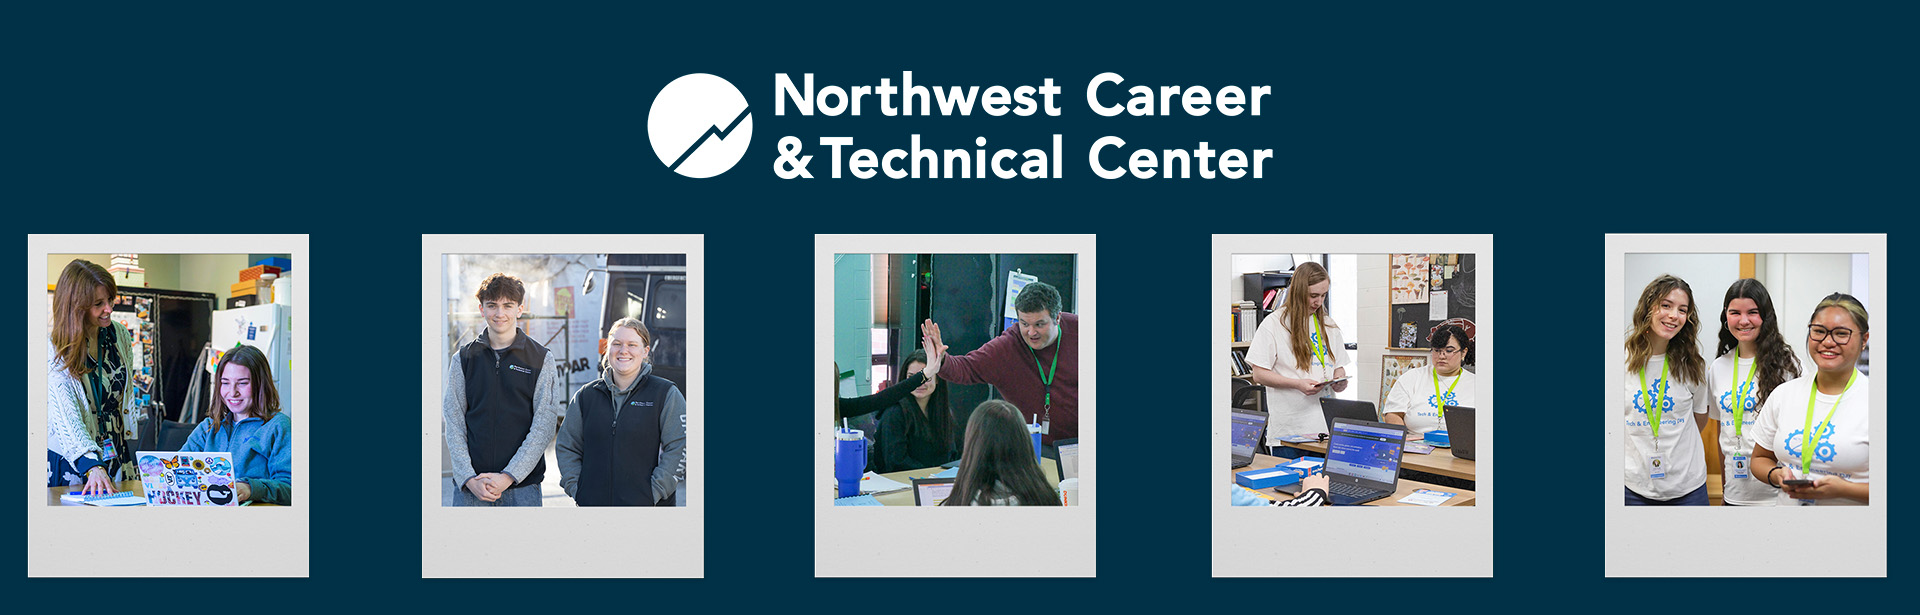 NCTC web banner